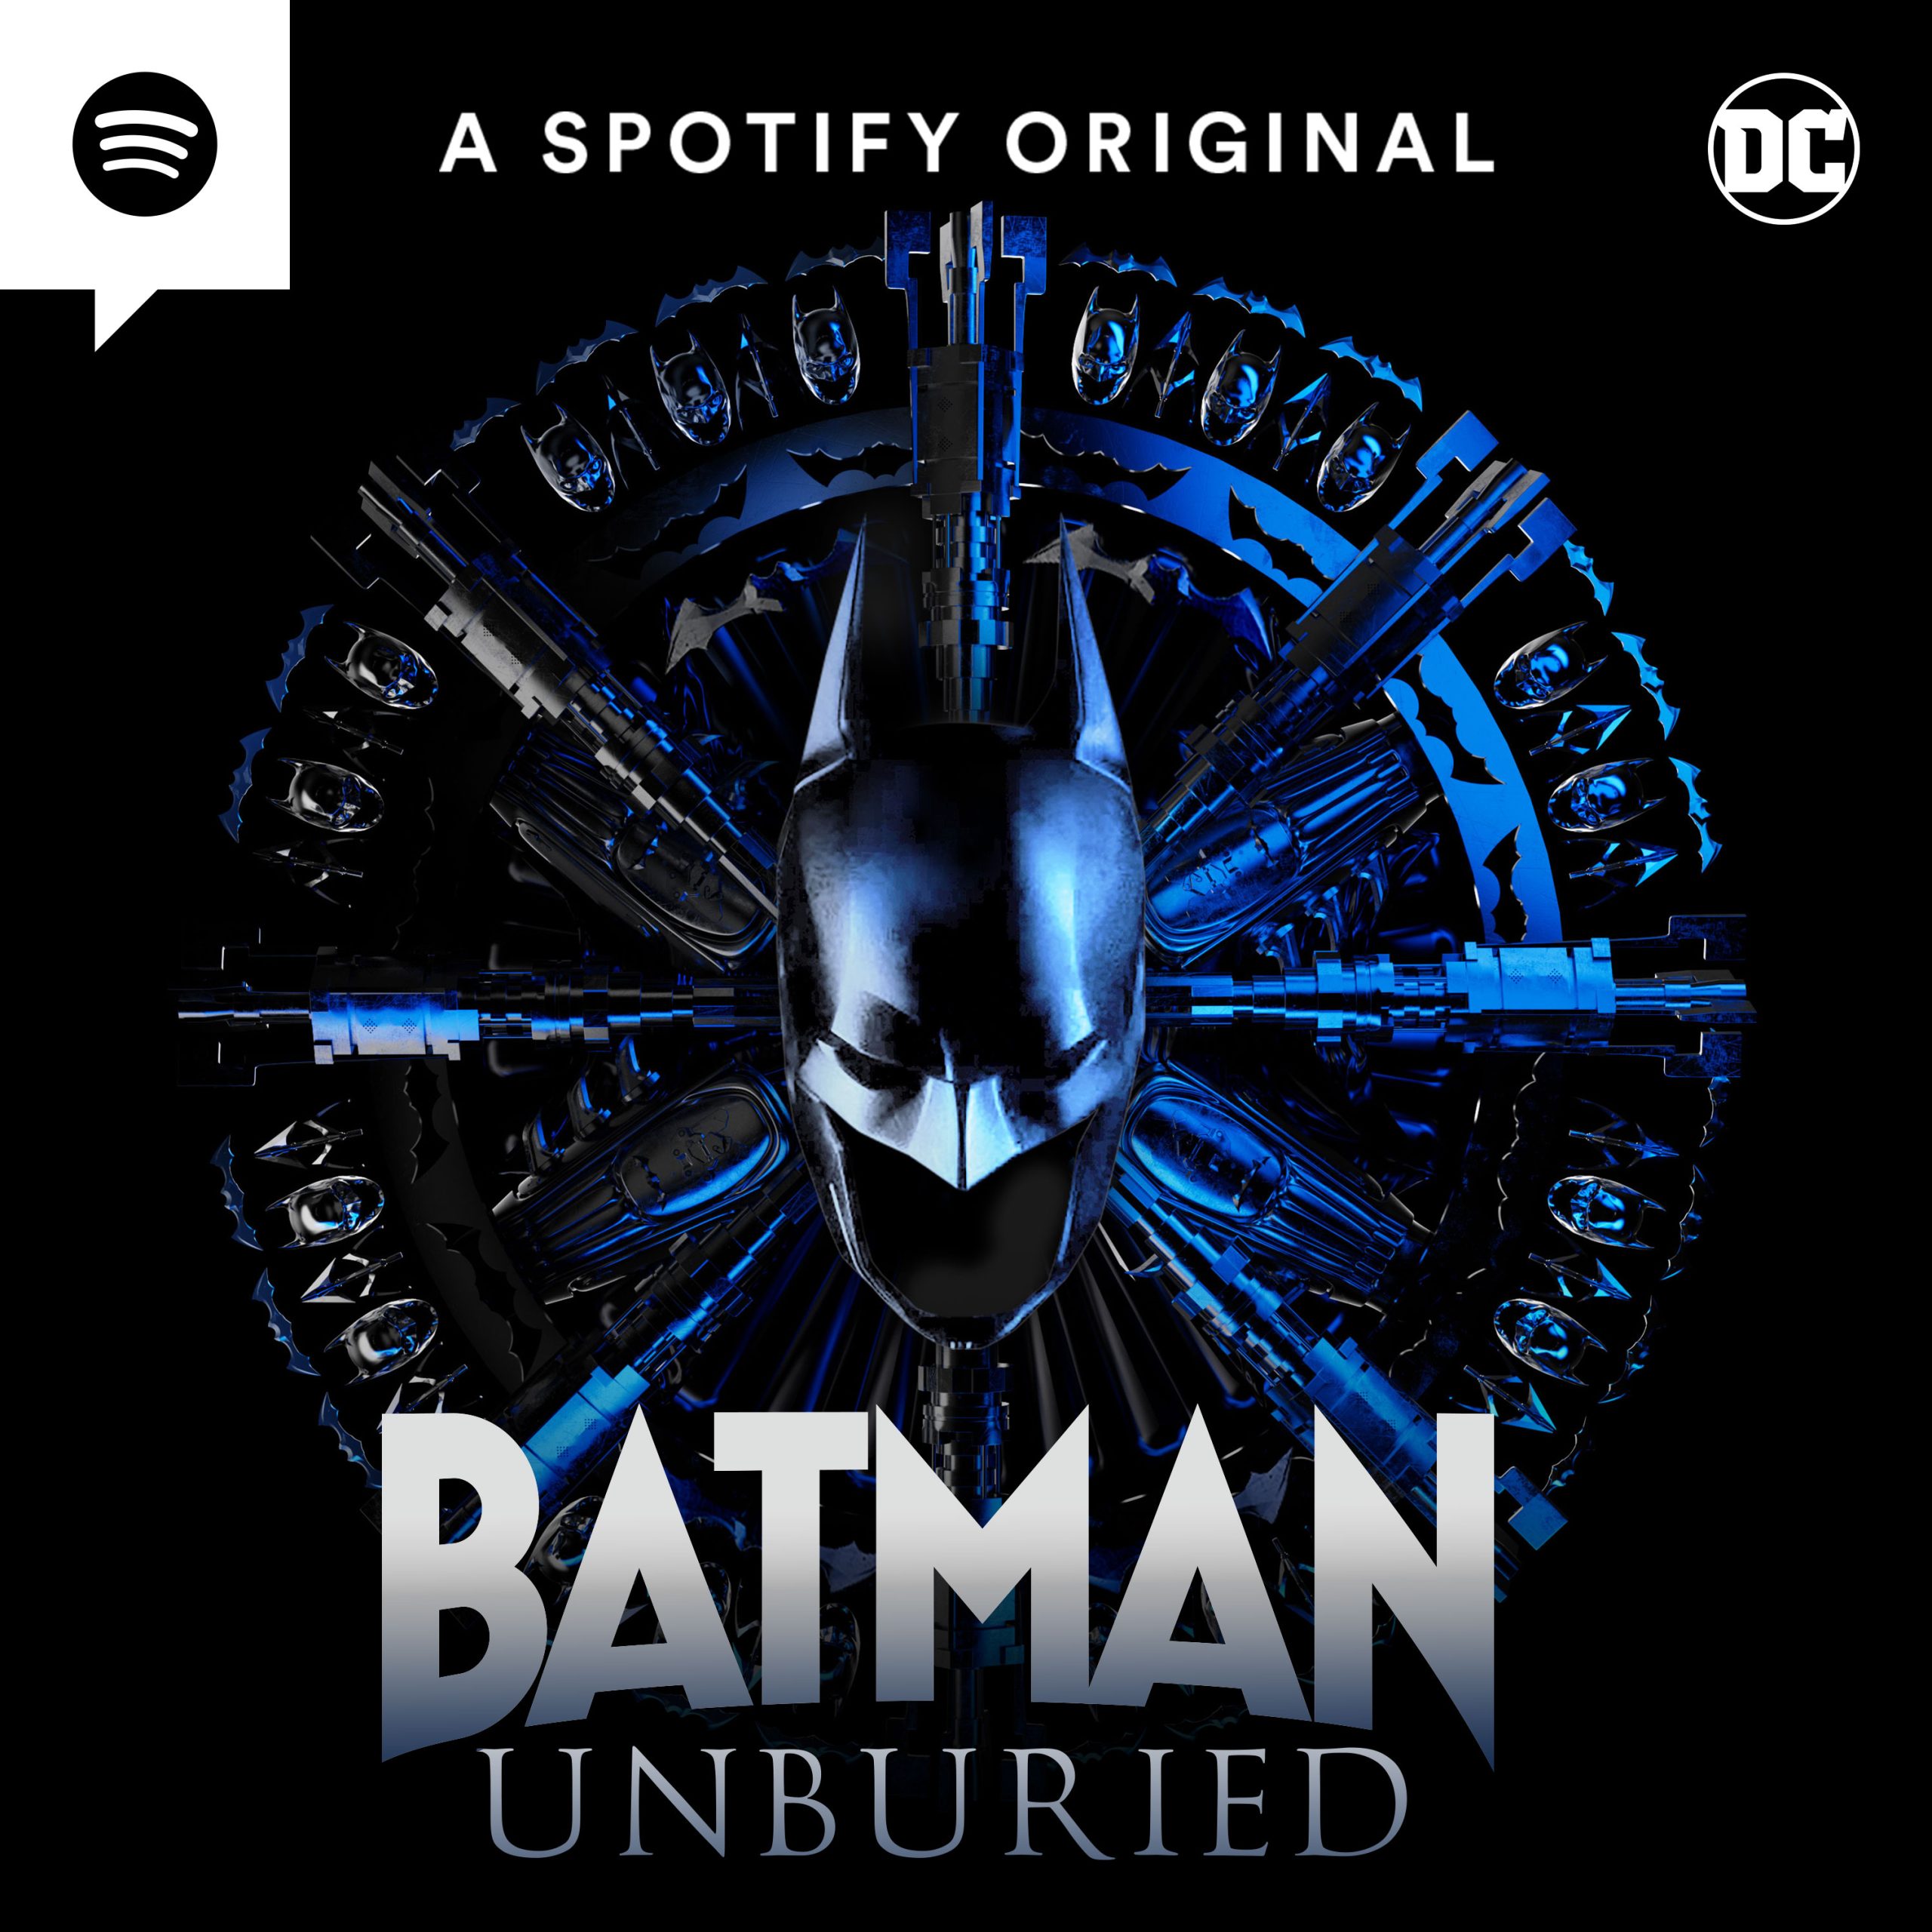 The Batman Unburied Audio Series Is Ready To Take Flight Across the World in Spotifys Largest Simultaneous Launch — Spotify